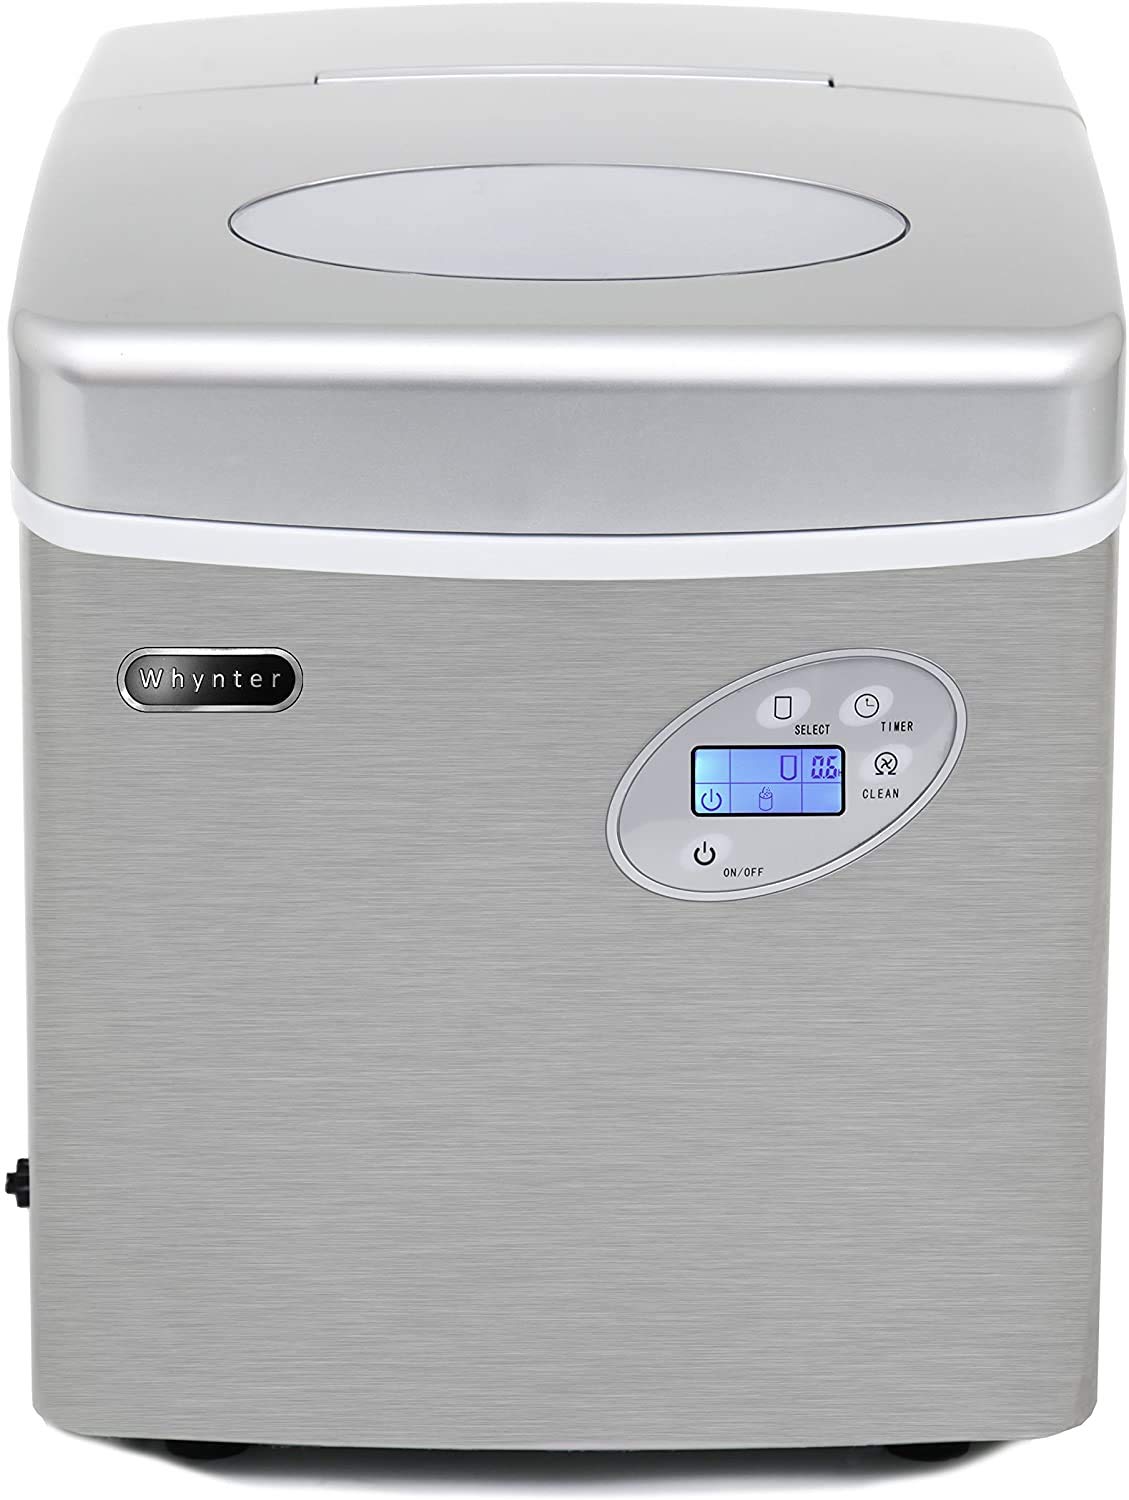 Whynter IMC-491DC Portable 49lb Capacity Stainless Steel with Water Connection Ice Makers + iSpring ICEK Ultra Safe Fridge Water Line Connection and Ice Maker Installation Kit